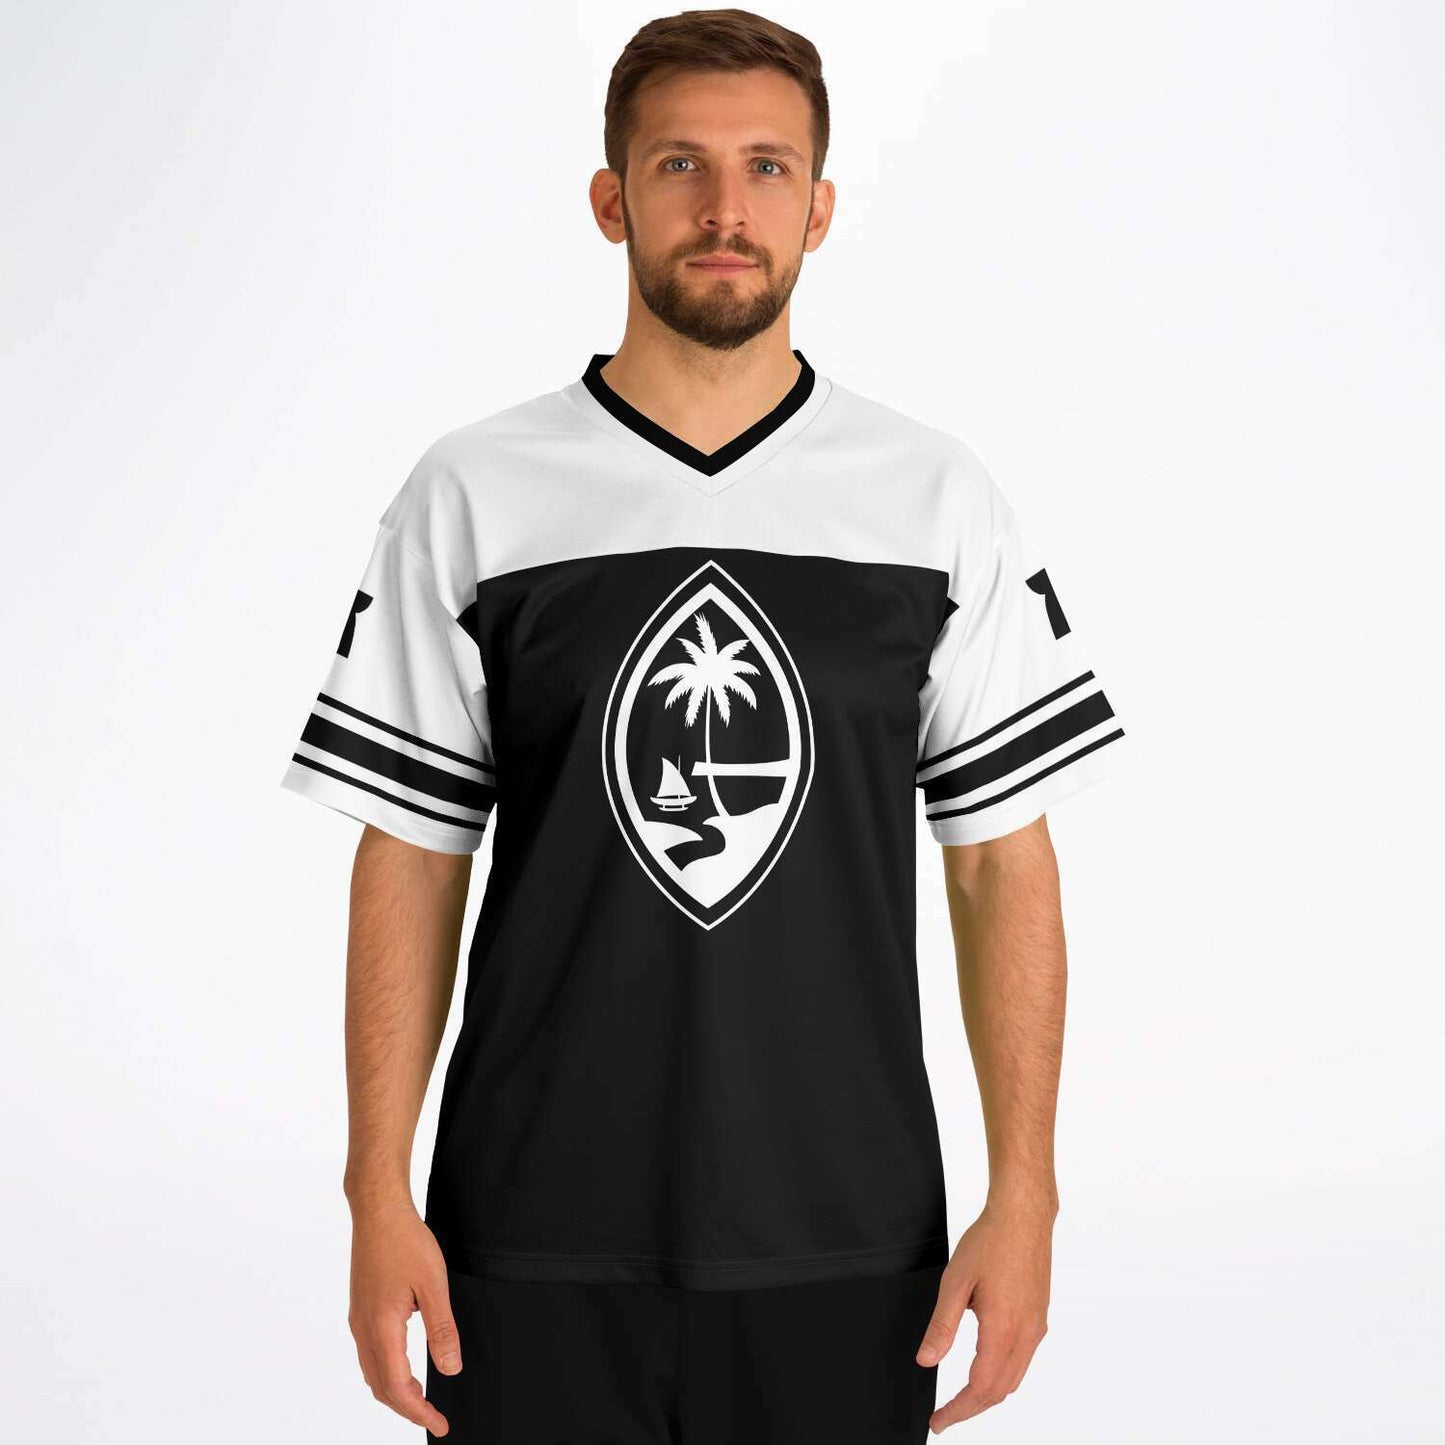 Guam Black and White Football Jersey